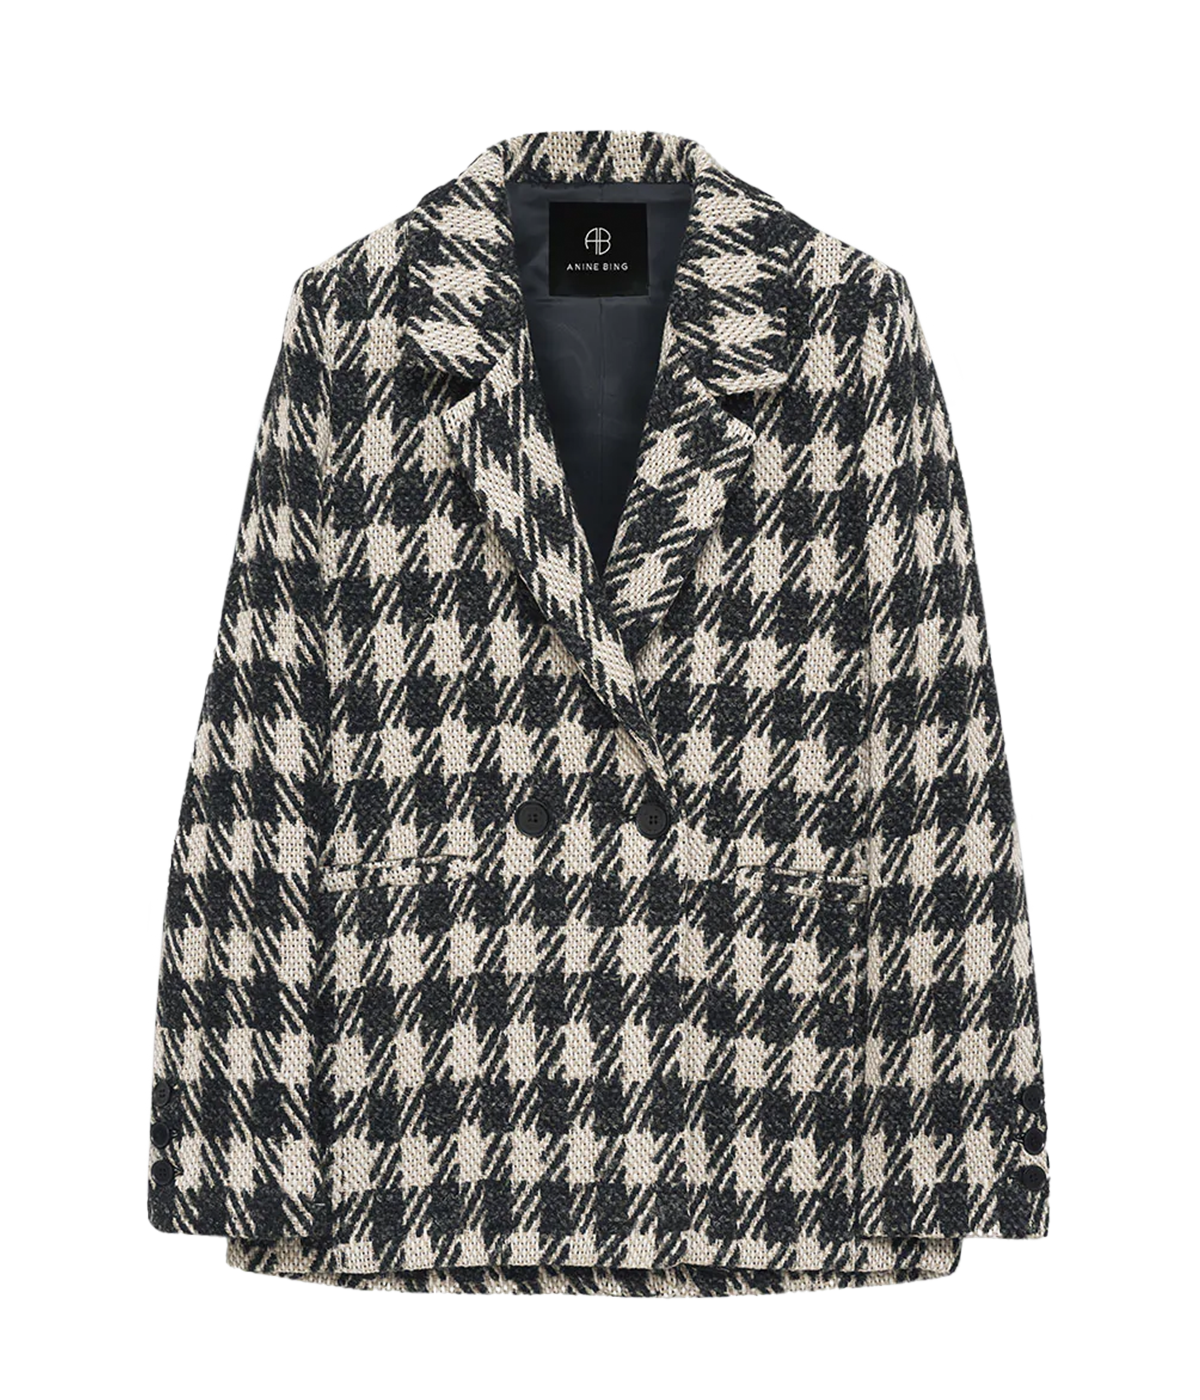 Image of a over sized blazer, with a black and tan plaid pattern with alternating texture.  Featuring a lined interior, chest pocket, three button cuff and double button front closure. 